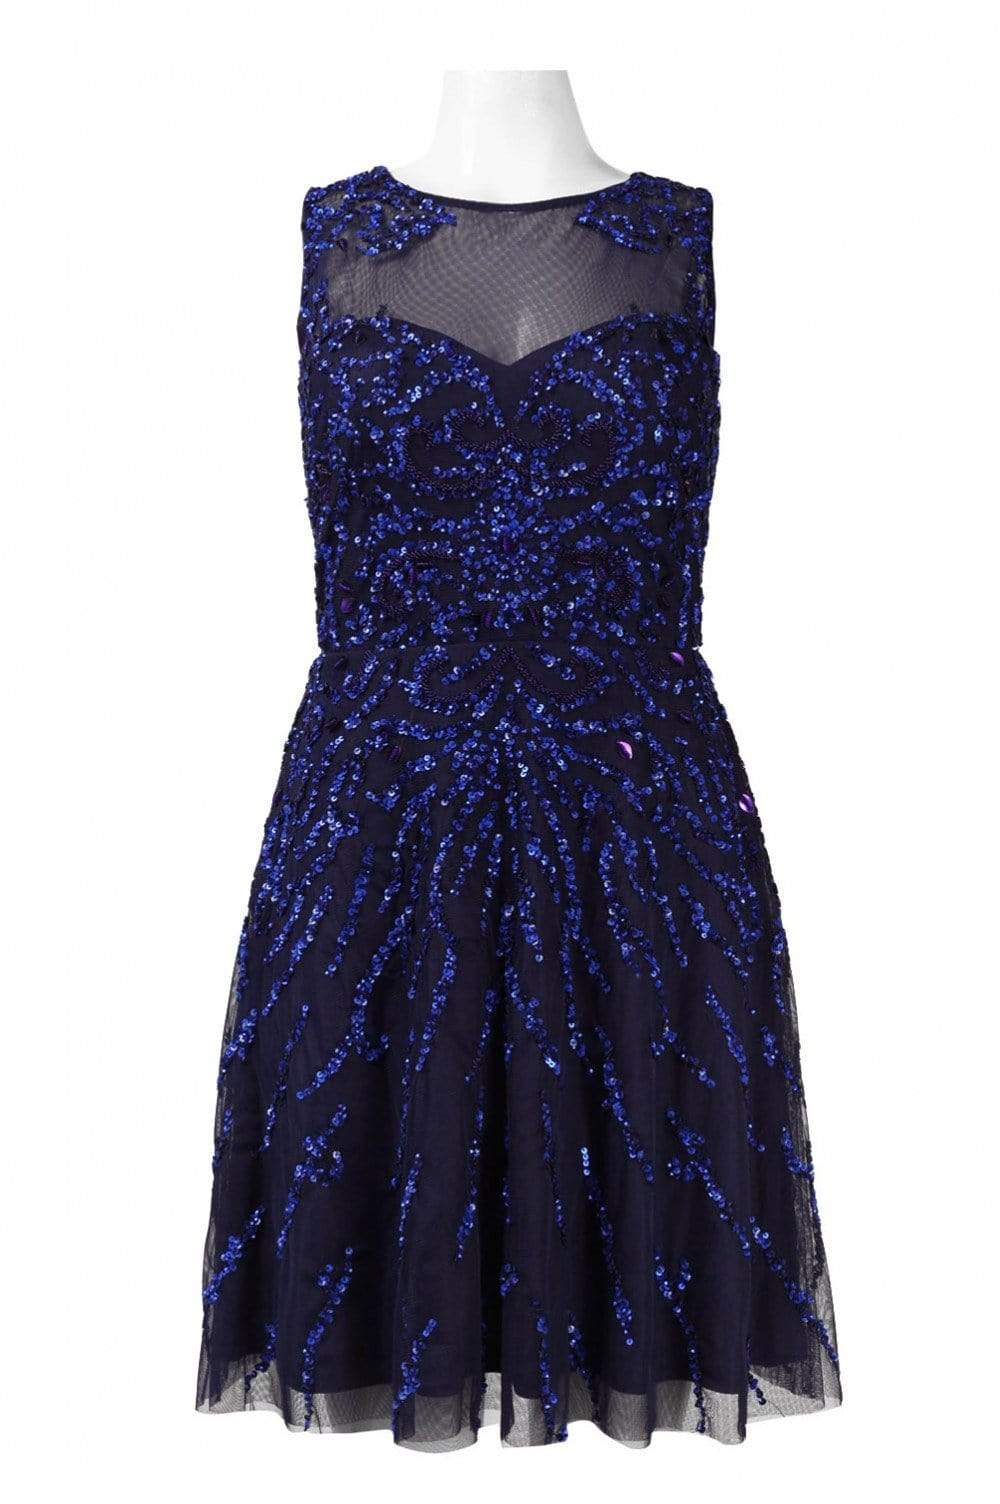 Adrianna Papell - 54465630 Illusion Jewel Sequined Mesh Cocktail Dress ...